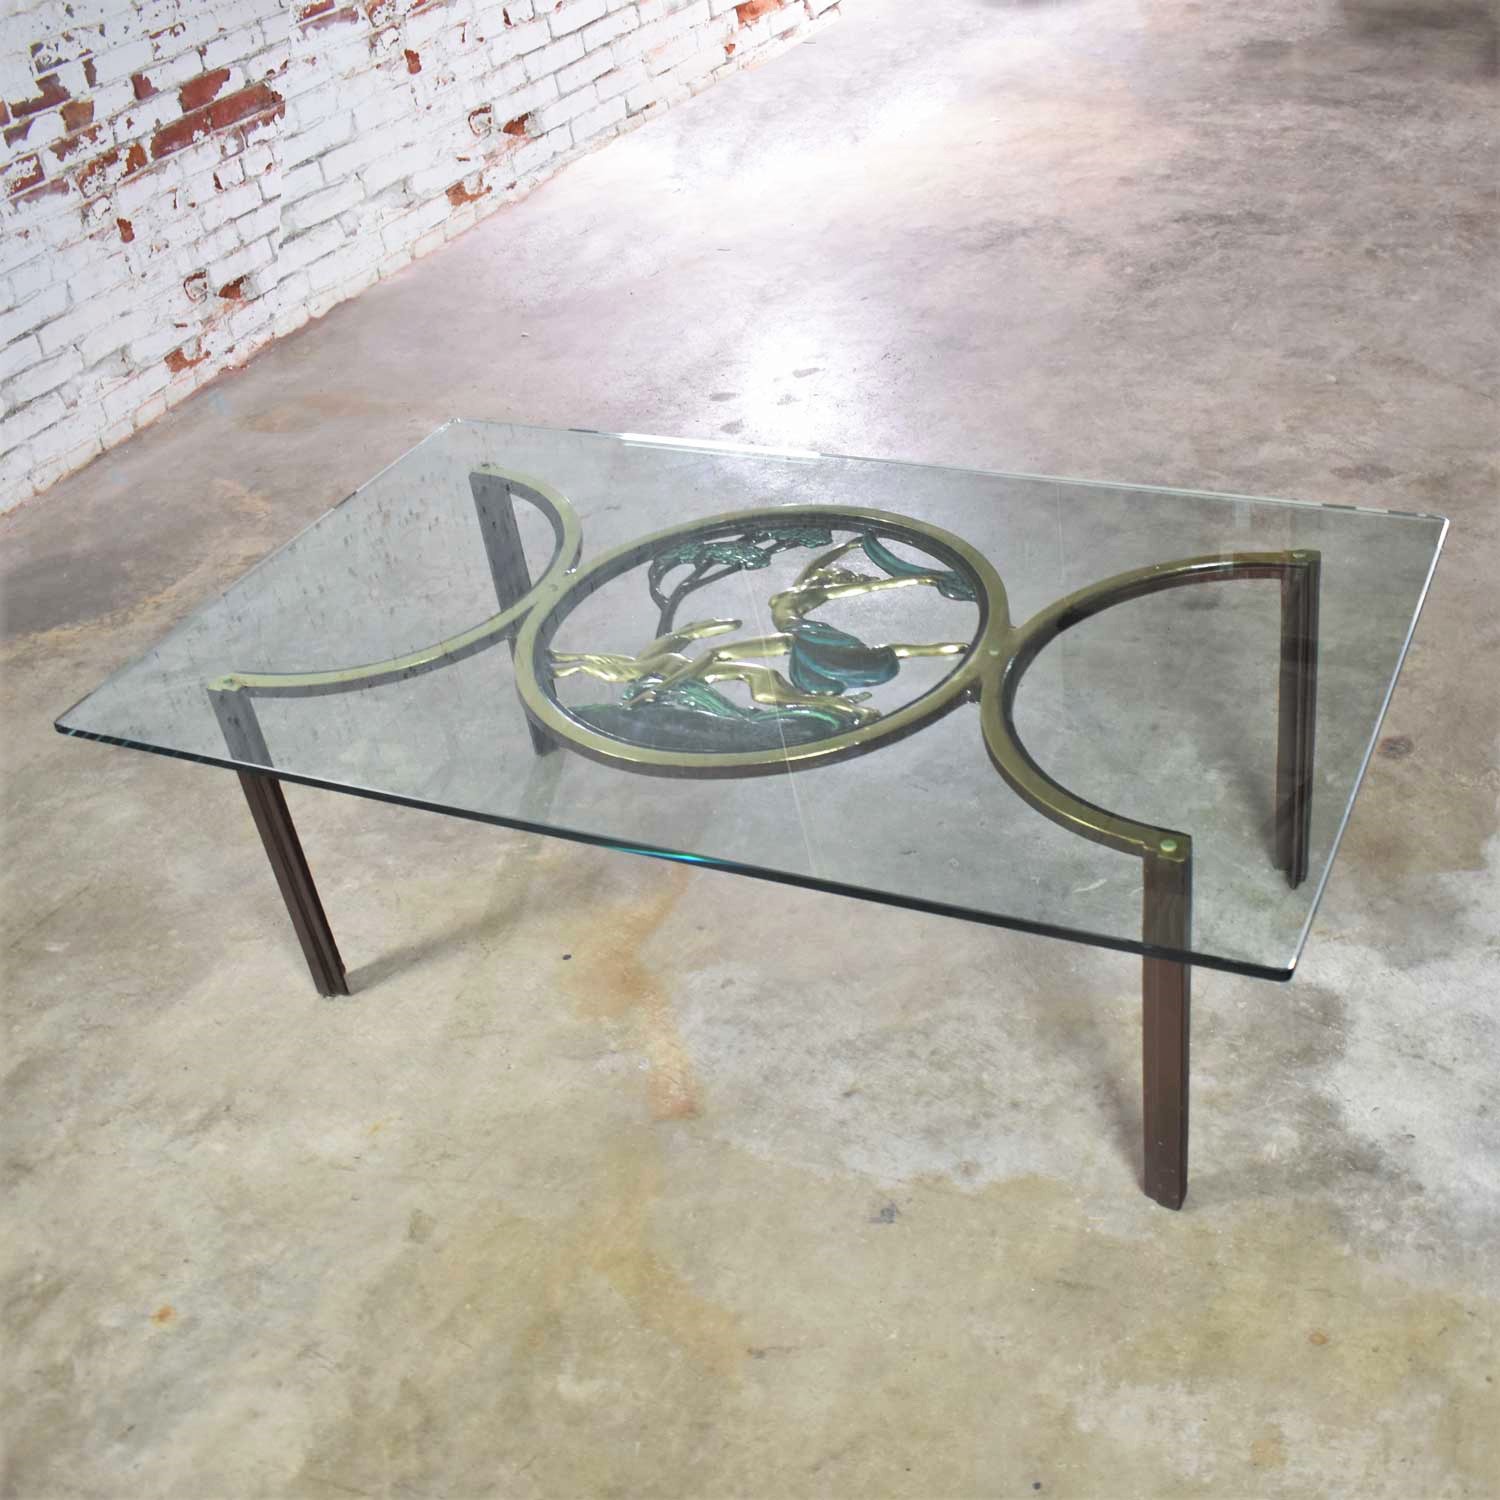 Art Deco Style Bronze Coffee Table with Diana the Huntress Medallion & Glass Top